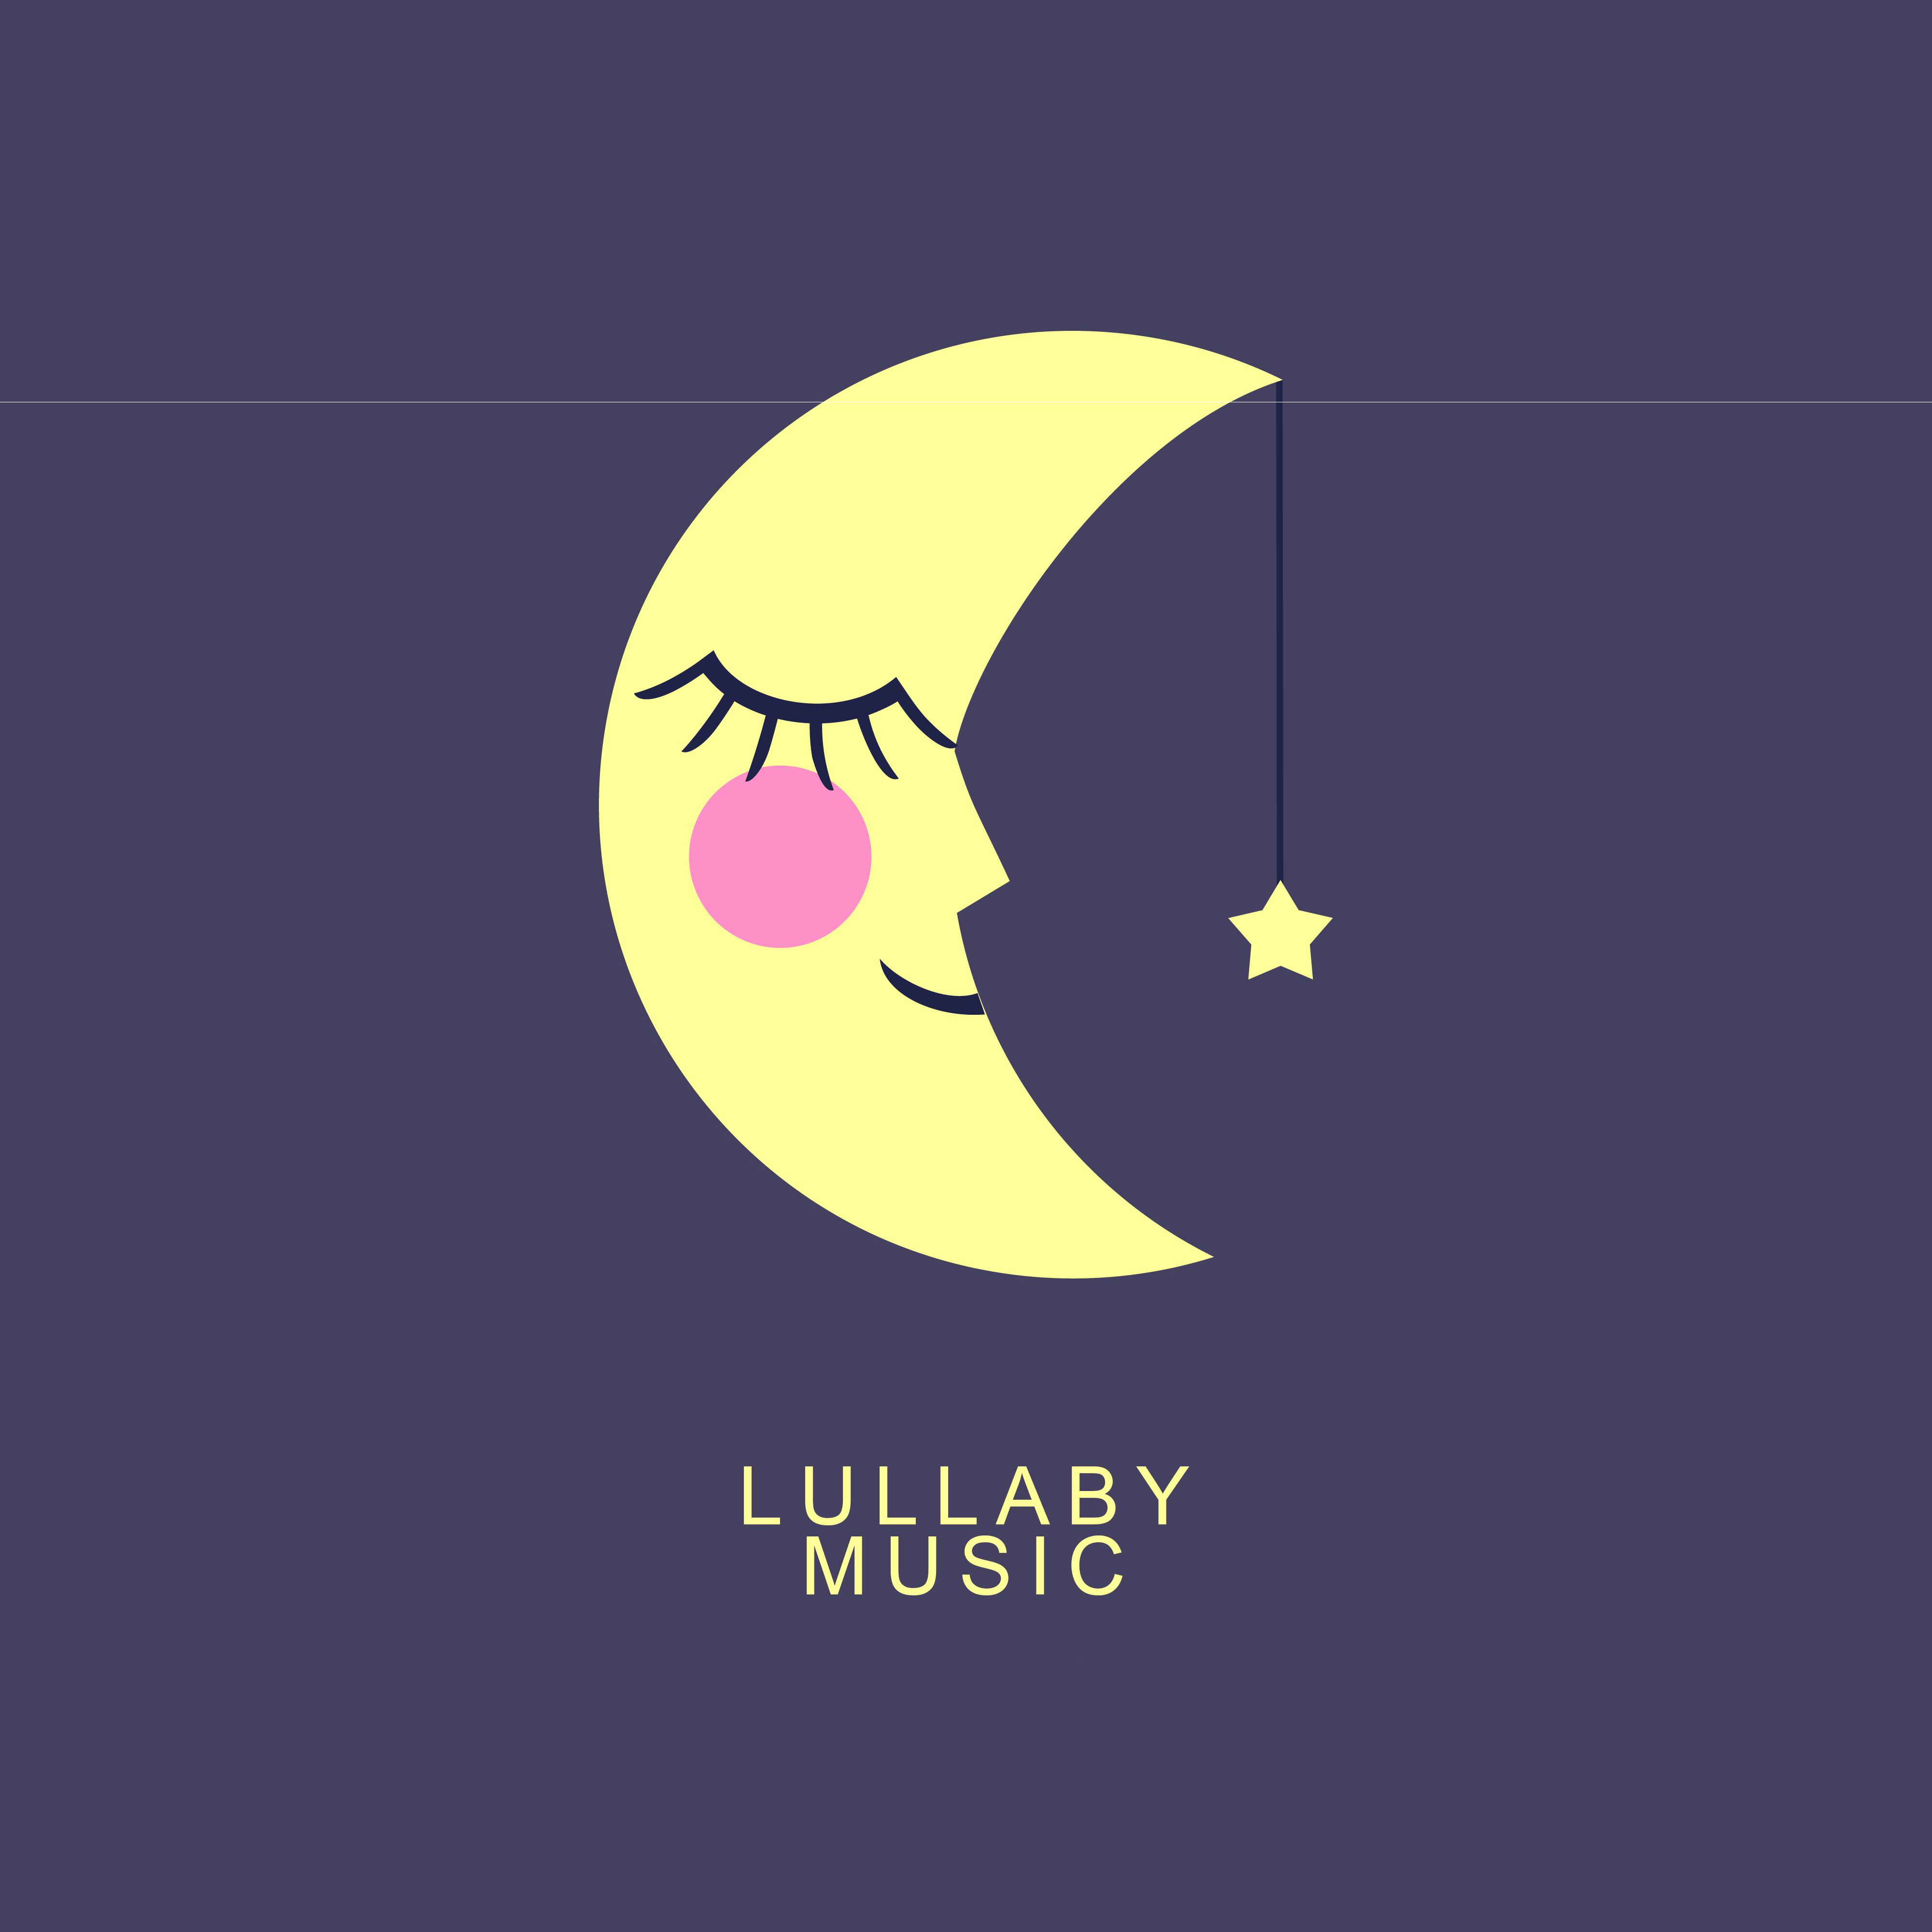 Lullaby Music (Soothing Music for All Kids: Newborn, Infant, Baby, Toddler and Children)